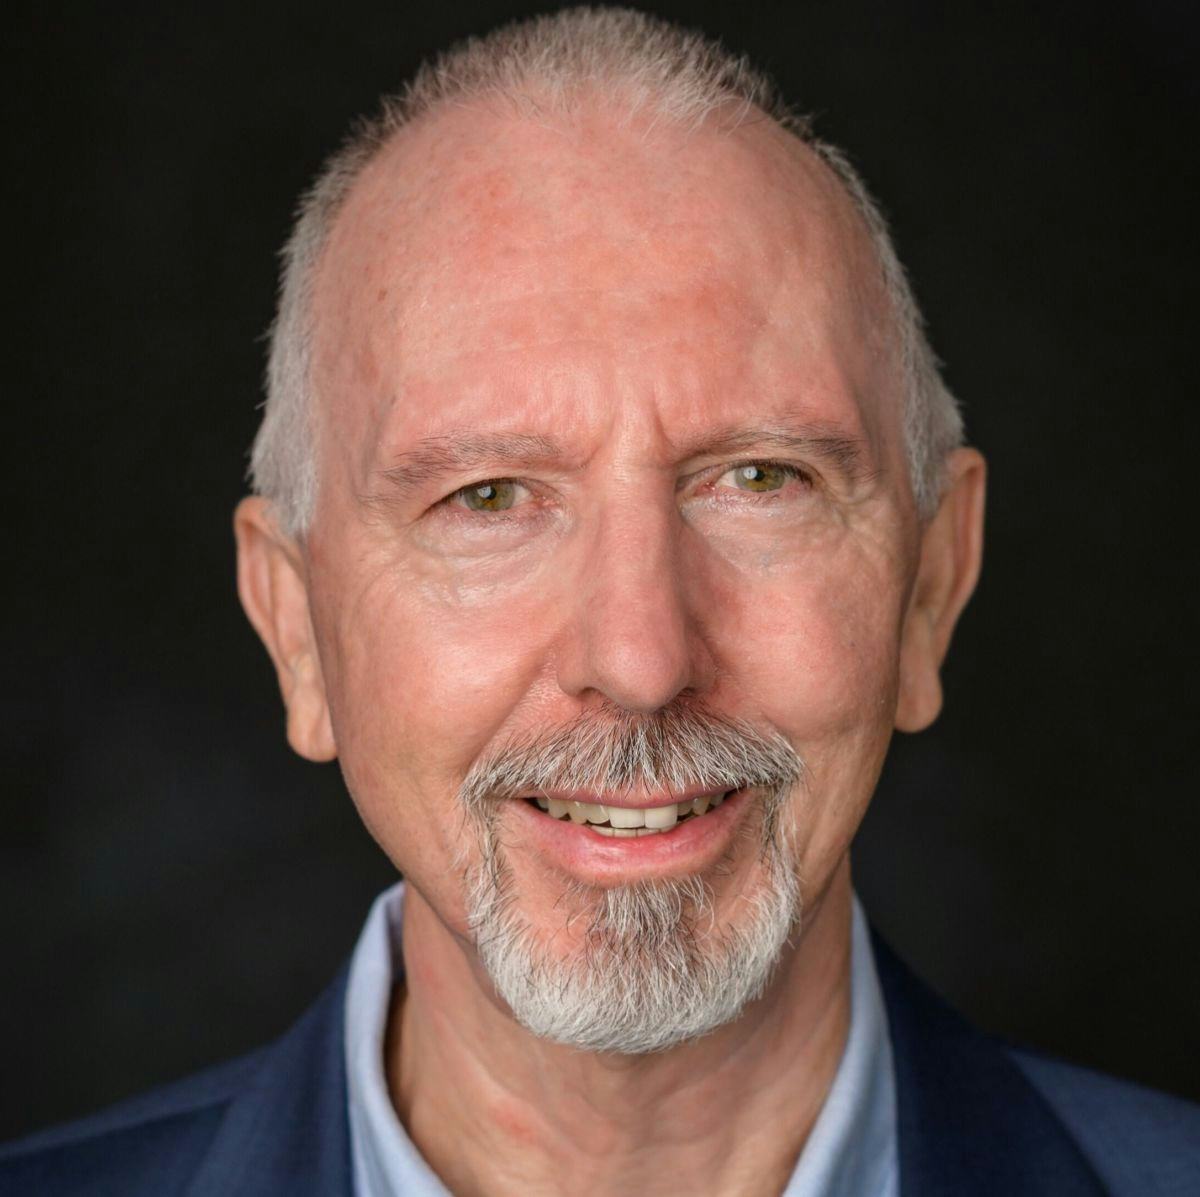 Dr. Keith Sheppard